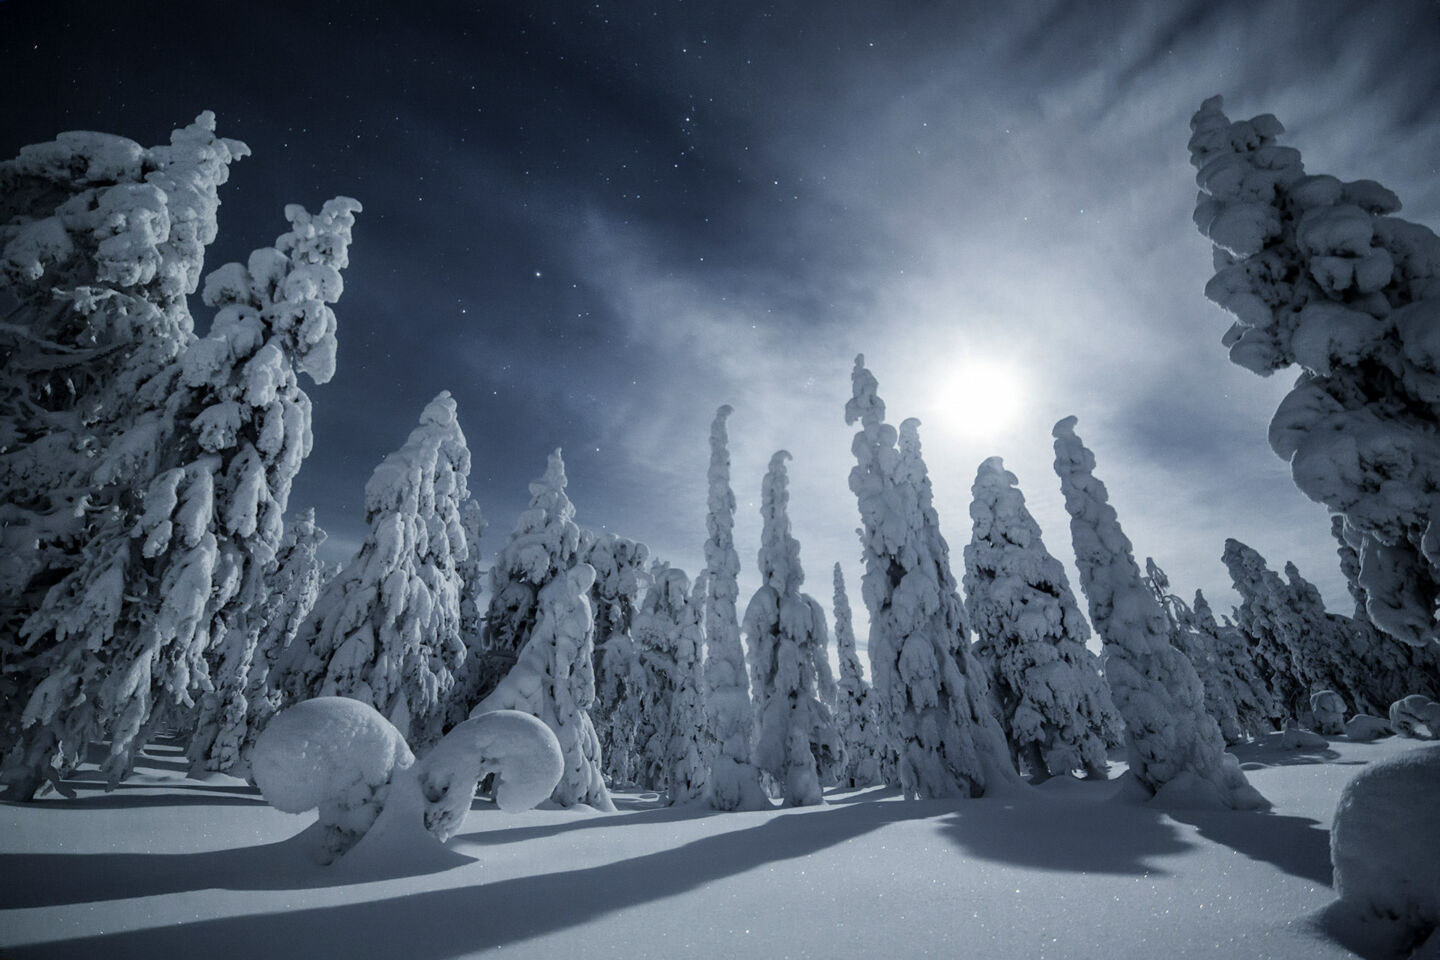 A snowscape lit up by the moon in Posio, a Finnish Lapland filming location